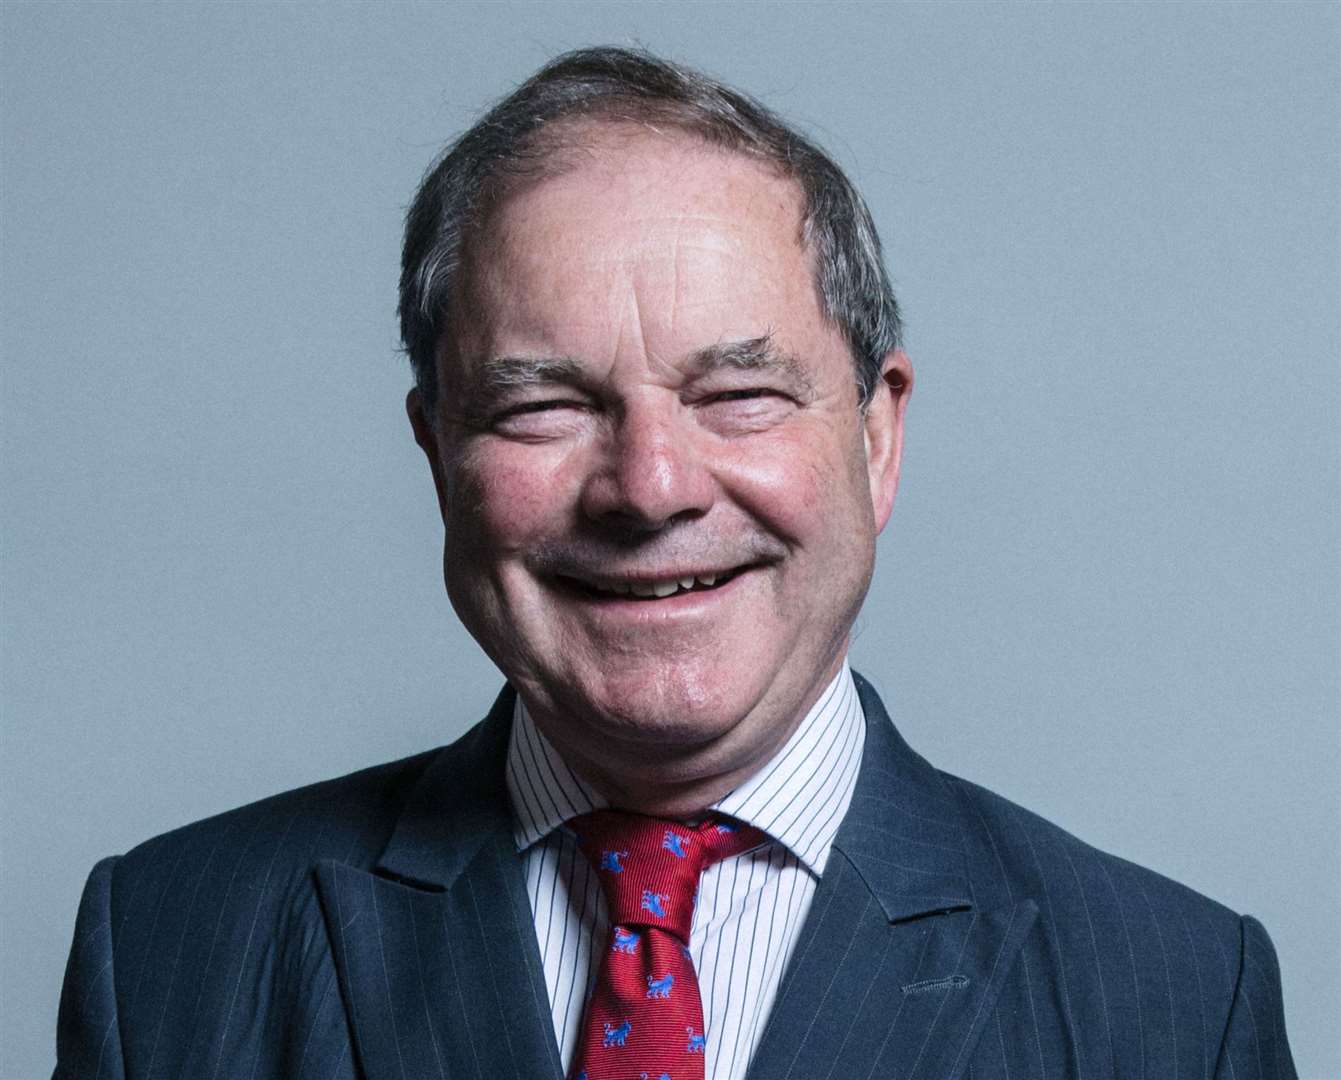 Sir Geoffrey Clifton-Brown said the Government must be as “competent as possible” despite having a large majority (Chris McAndrew/UK Parliament/Att)